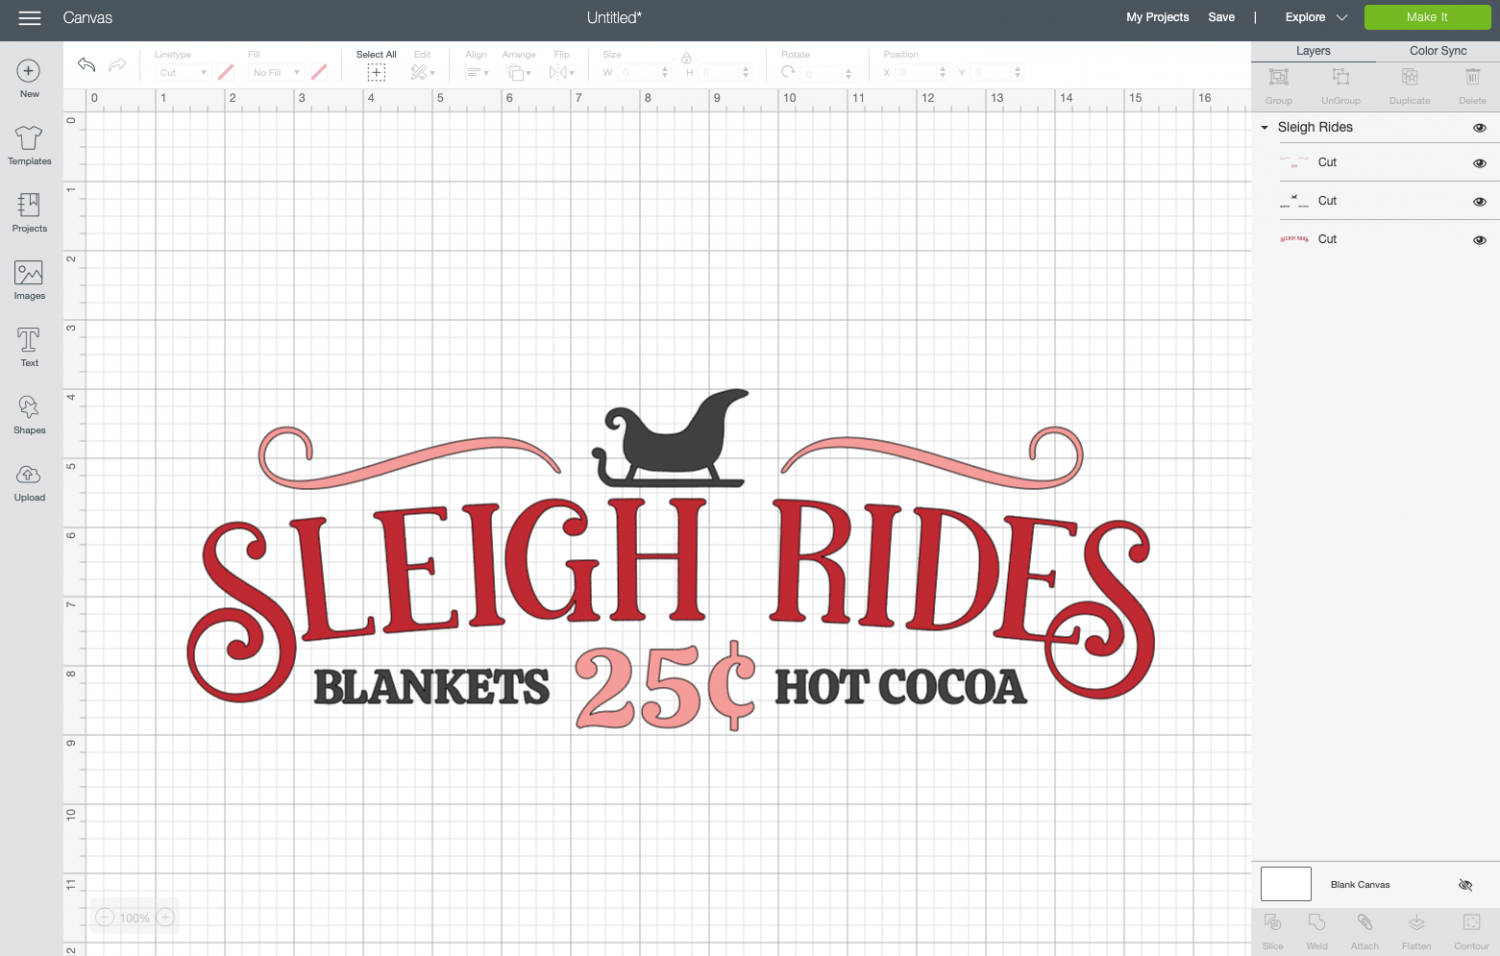 Cricut Design Space: Sleigh Rides file uploaded to Canvas